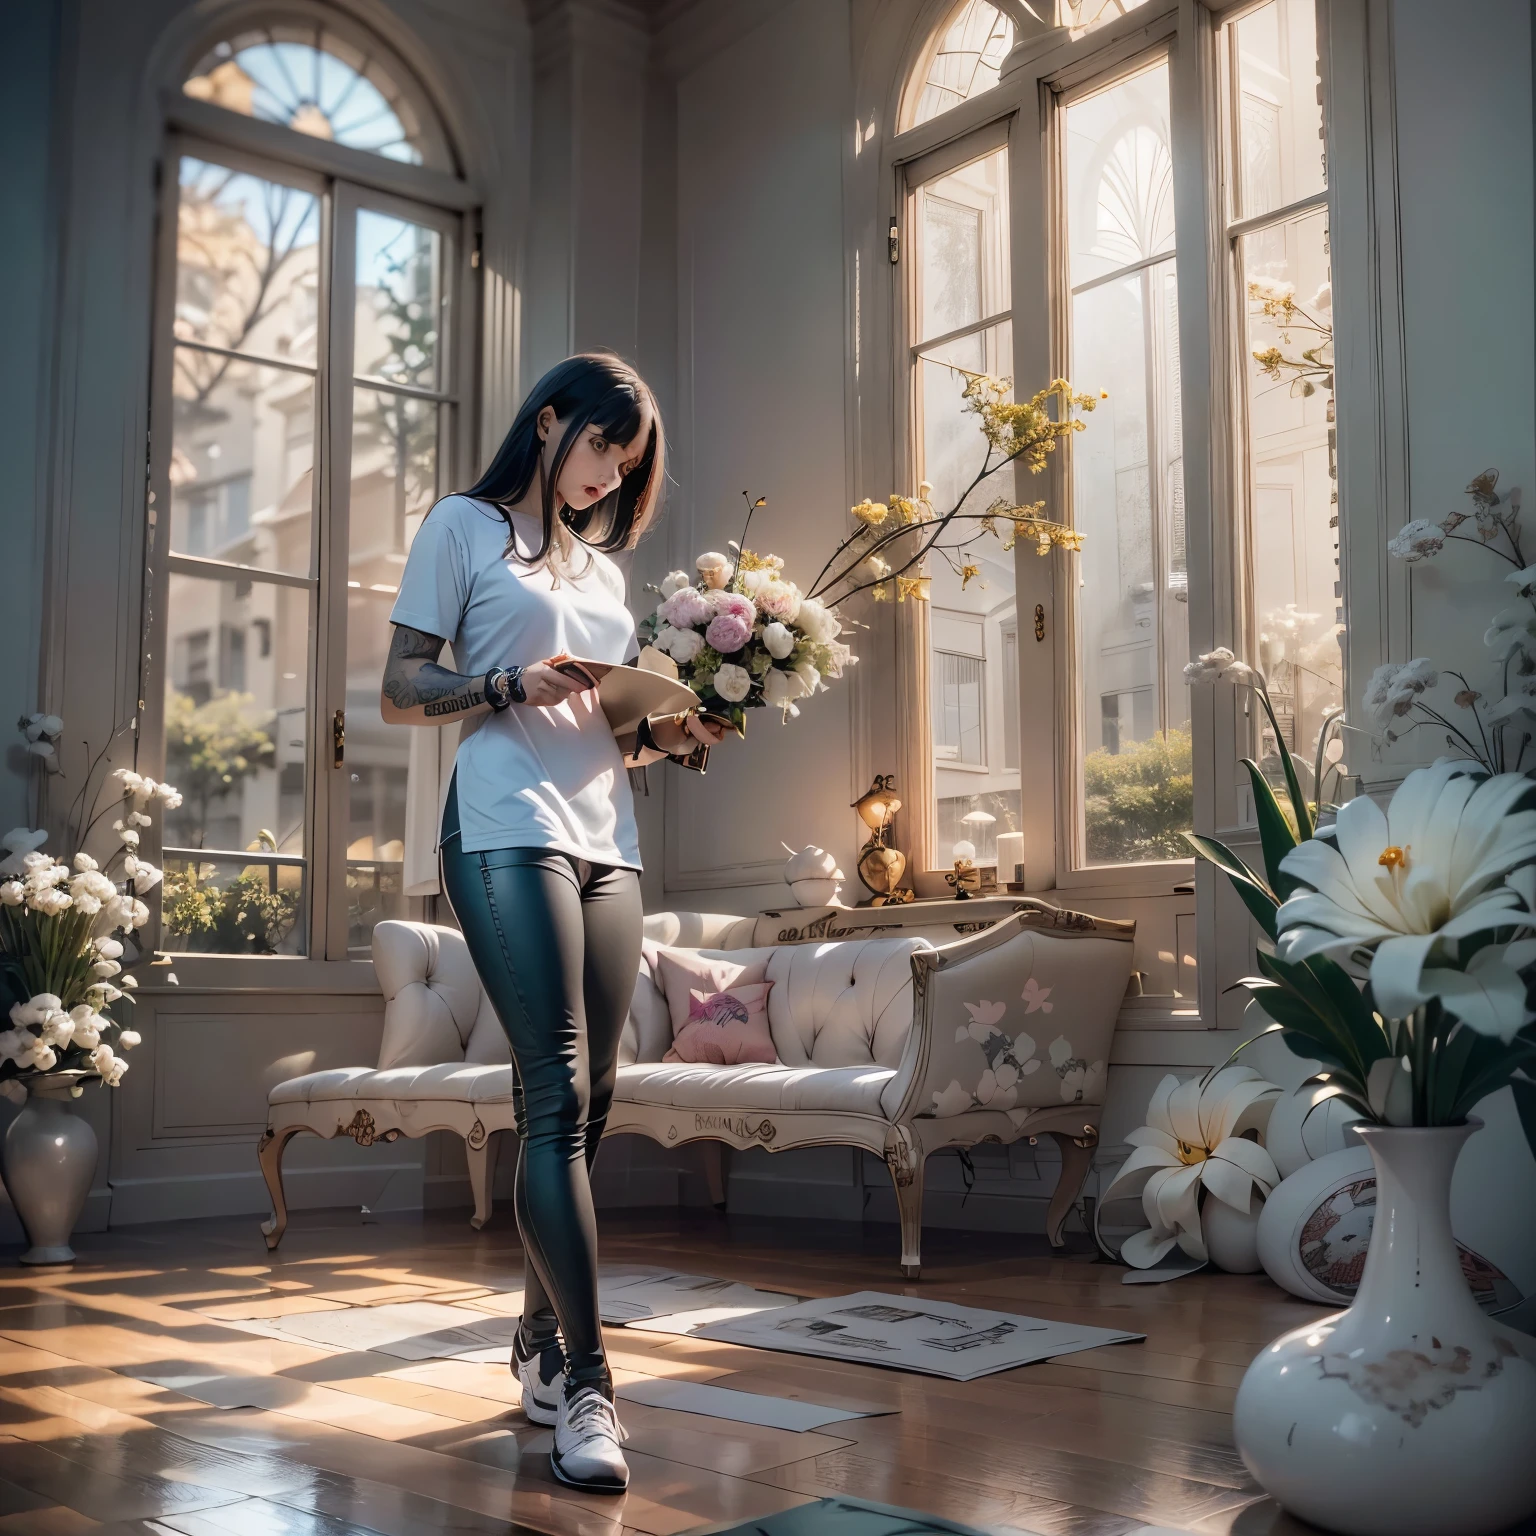 ((Masterpiece, Best quality:1.3), (ultra detail:1.3), 1 guy, Alone, (dark hair, shoulder-length, long hair), (on a strong body, dark stylish T-shirt, strong arms, bracelets, and tattoo, wearing tight dark pants), (rock star)). ((Calm look, relaxed pose, holds a lily flower in his hand.) (Stands at full height). (Modern interior, art deco, studio room, many flowers - lilieodern style, high ceilings)) . Best quality, (SURREALISM: 1.3)). (real flowers decorate the interior in simple glass vases on the floor), (the flowers are stunning looking). ((masterpiece: 1.2), (realism: 1.2), (Best quality), (special attention to details of the face, figure, colors, room elements: 1.3)). (Open window, exquisite design, mostly in light colors: white, blue, yellow, gold). (High light ceiling).((Realistic 3D visualization, super detail, ray tracing, flooded sunlight, contrasting shadows - cool tones, warm soft light)). Modern style (modern), (High-Tech), (surrealism: 1.3), Excellent, high quality. Hand-drawn realism.